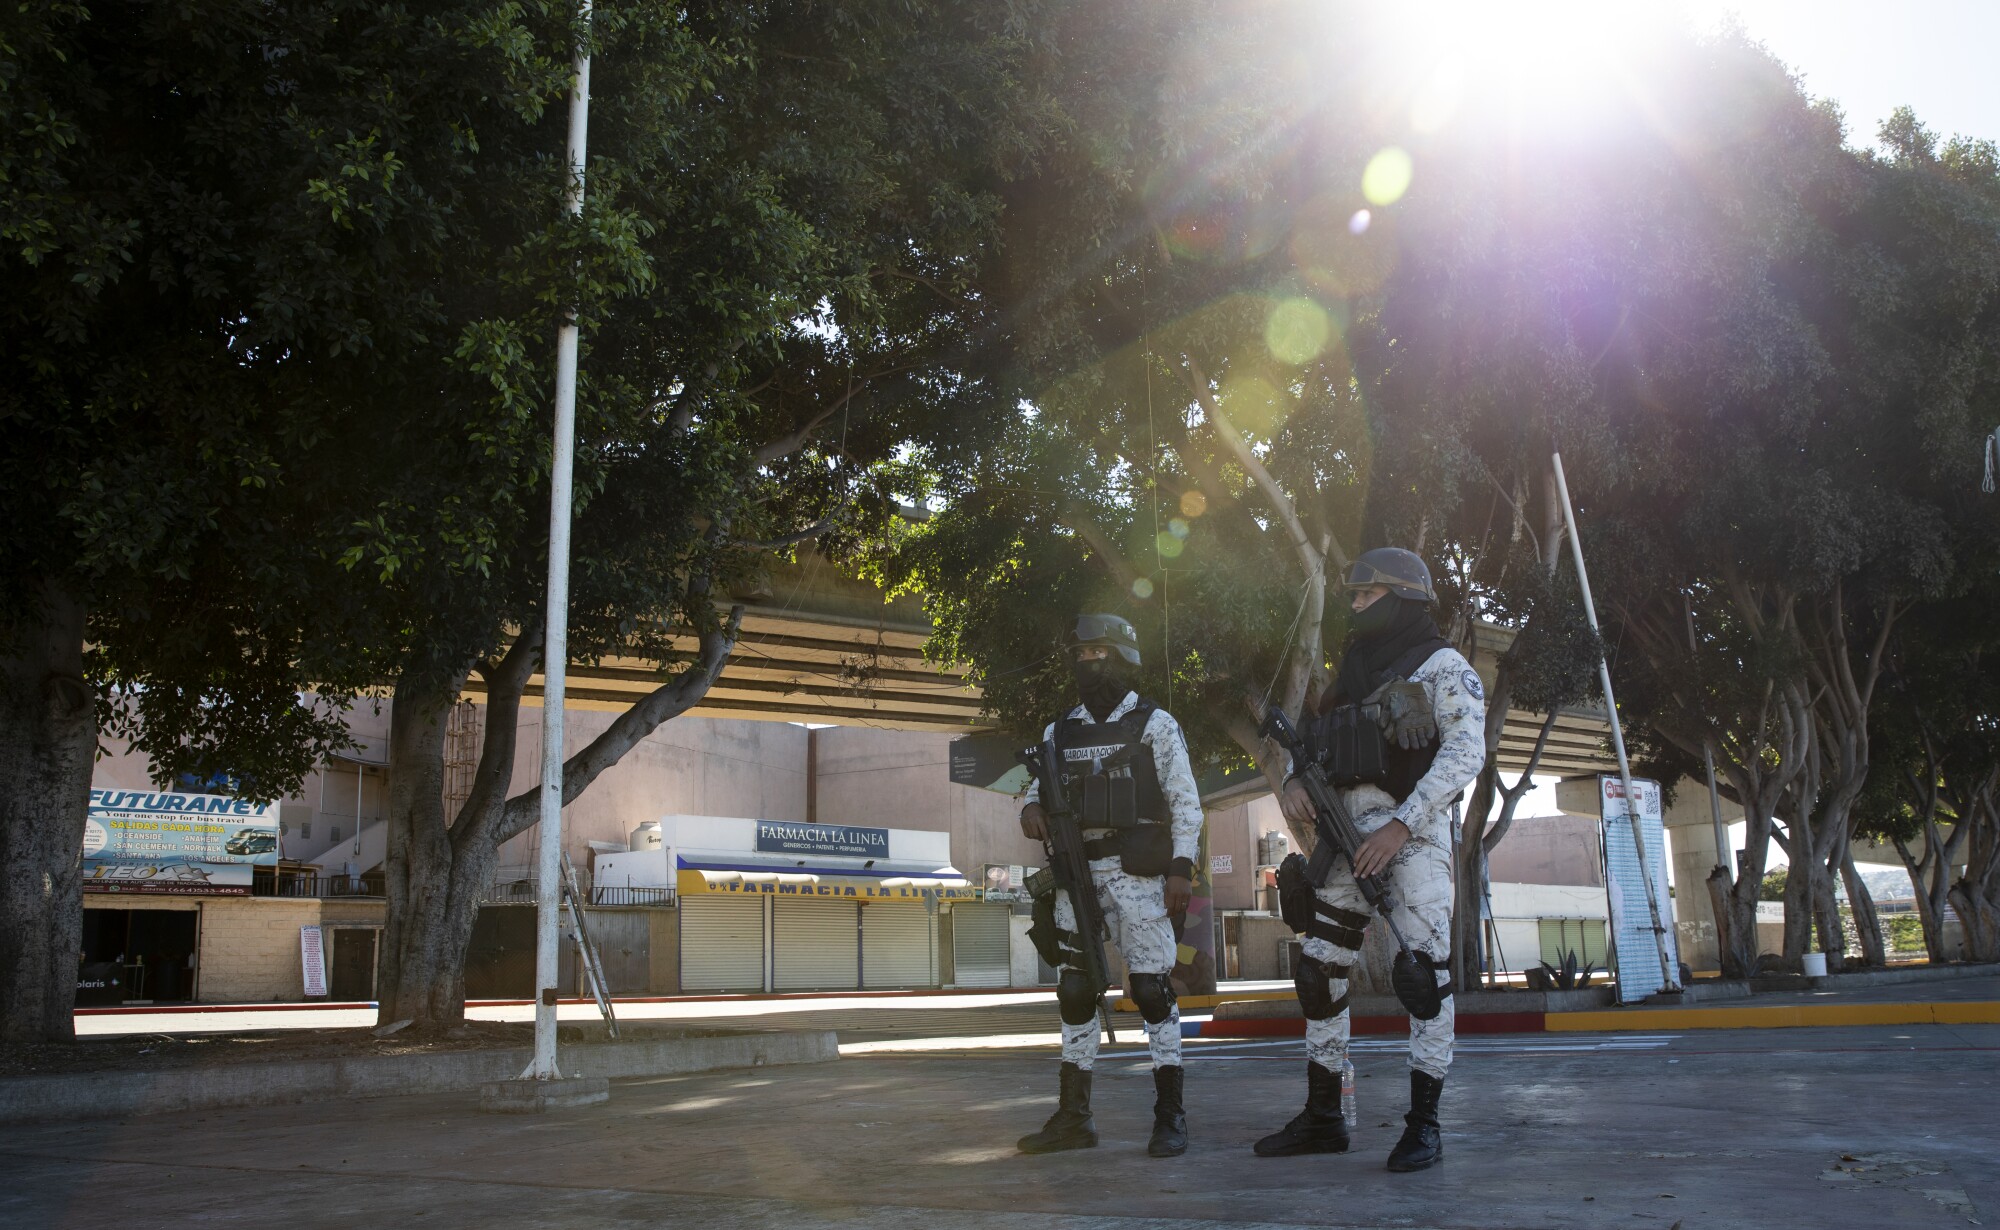 National Guard members watch over El Chaparral plaza 